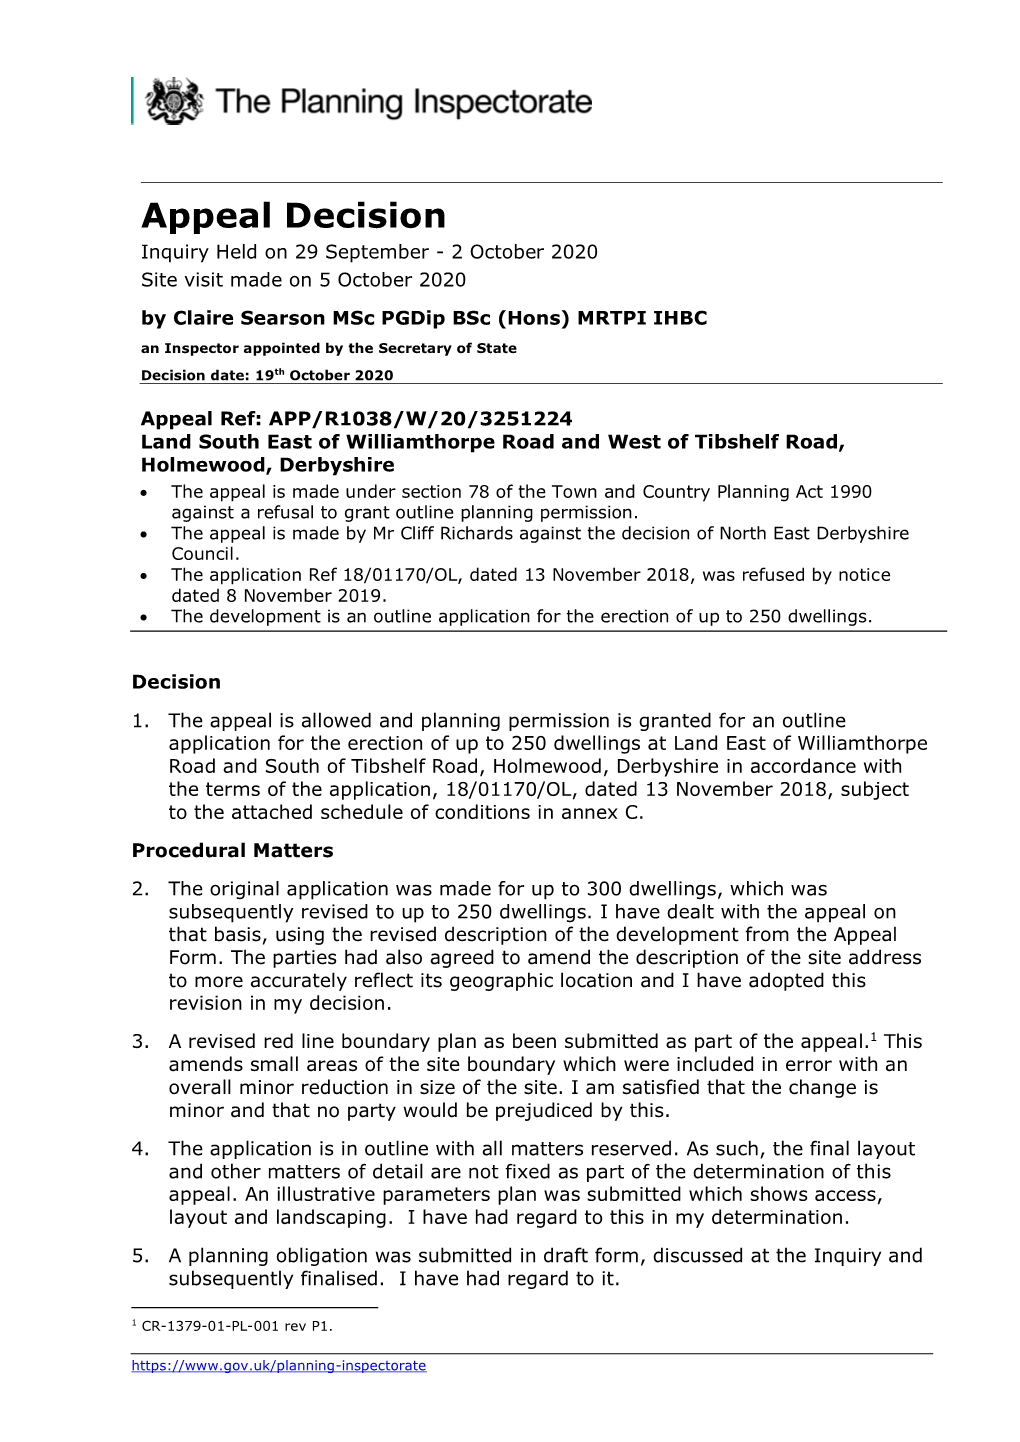 Appeal Decision Inquiry Held on 29 September - 2 October 2020 Site Visit Made on 5 October 2020